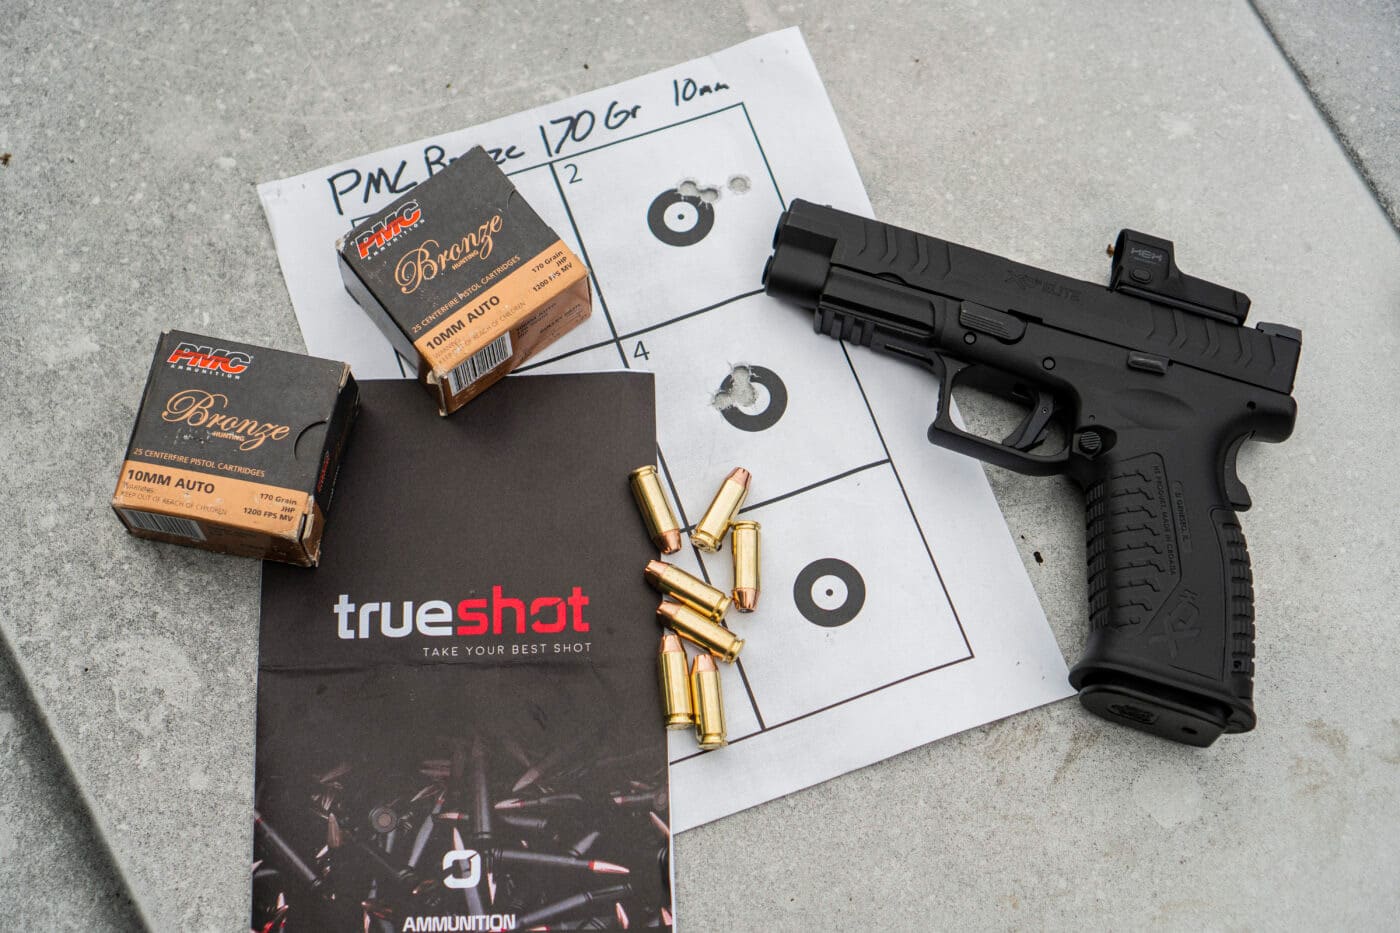 Springfield XD-M Elite 4.5" 10mm pistol and ammo resting on top of target used for accuracy testing as well as a True Shot brochure